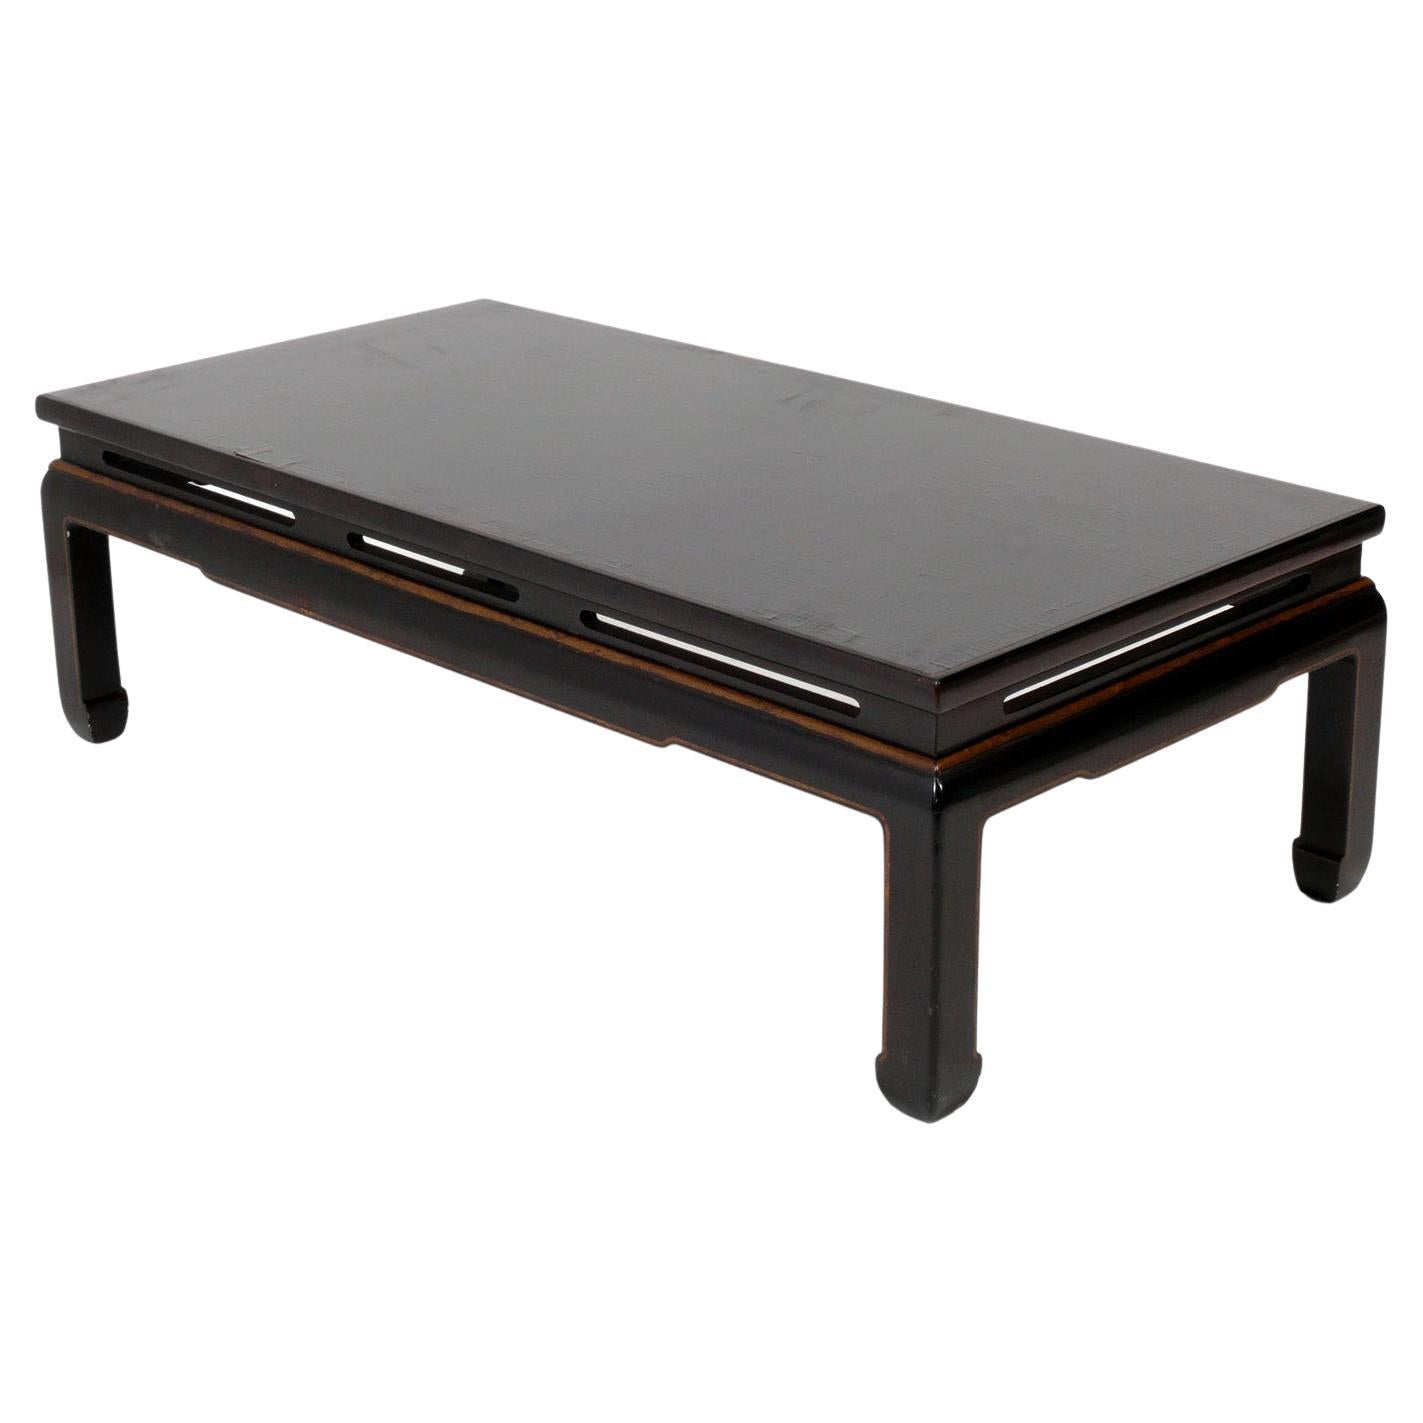 it ® Coffee Table Low Celestial Chinese Etnicart 27x27x27-High Quality 